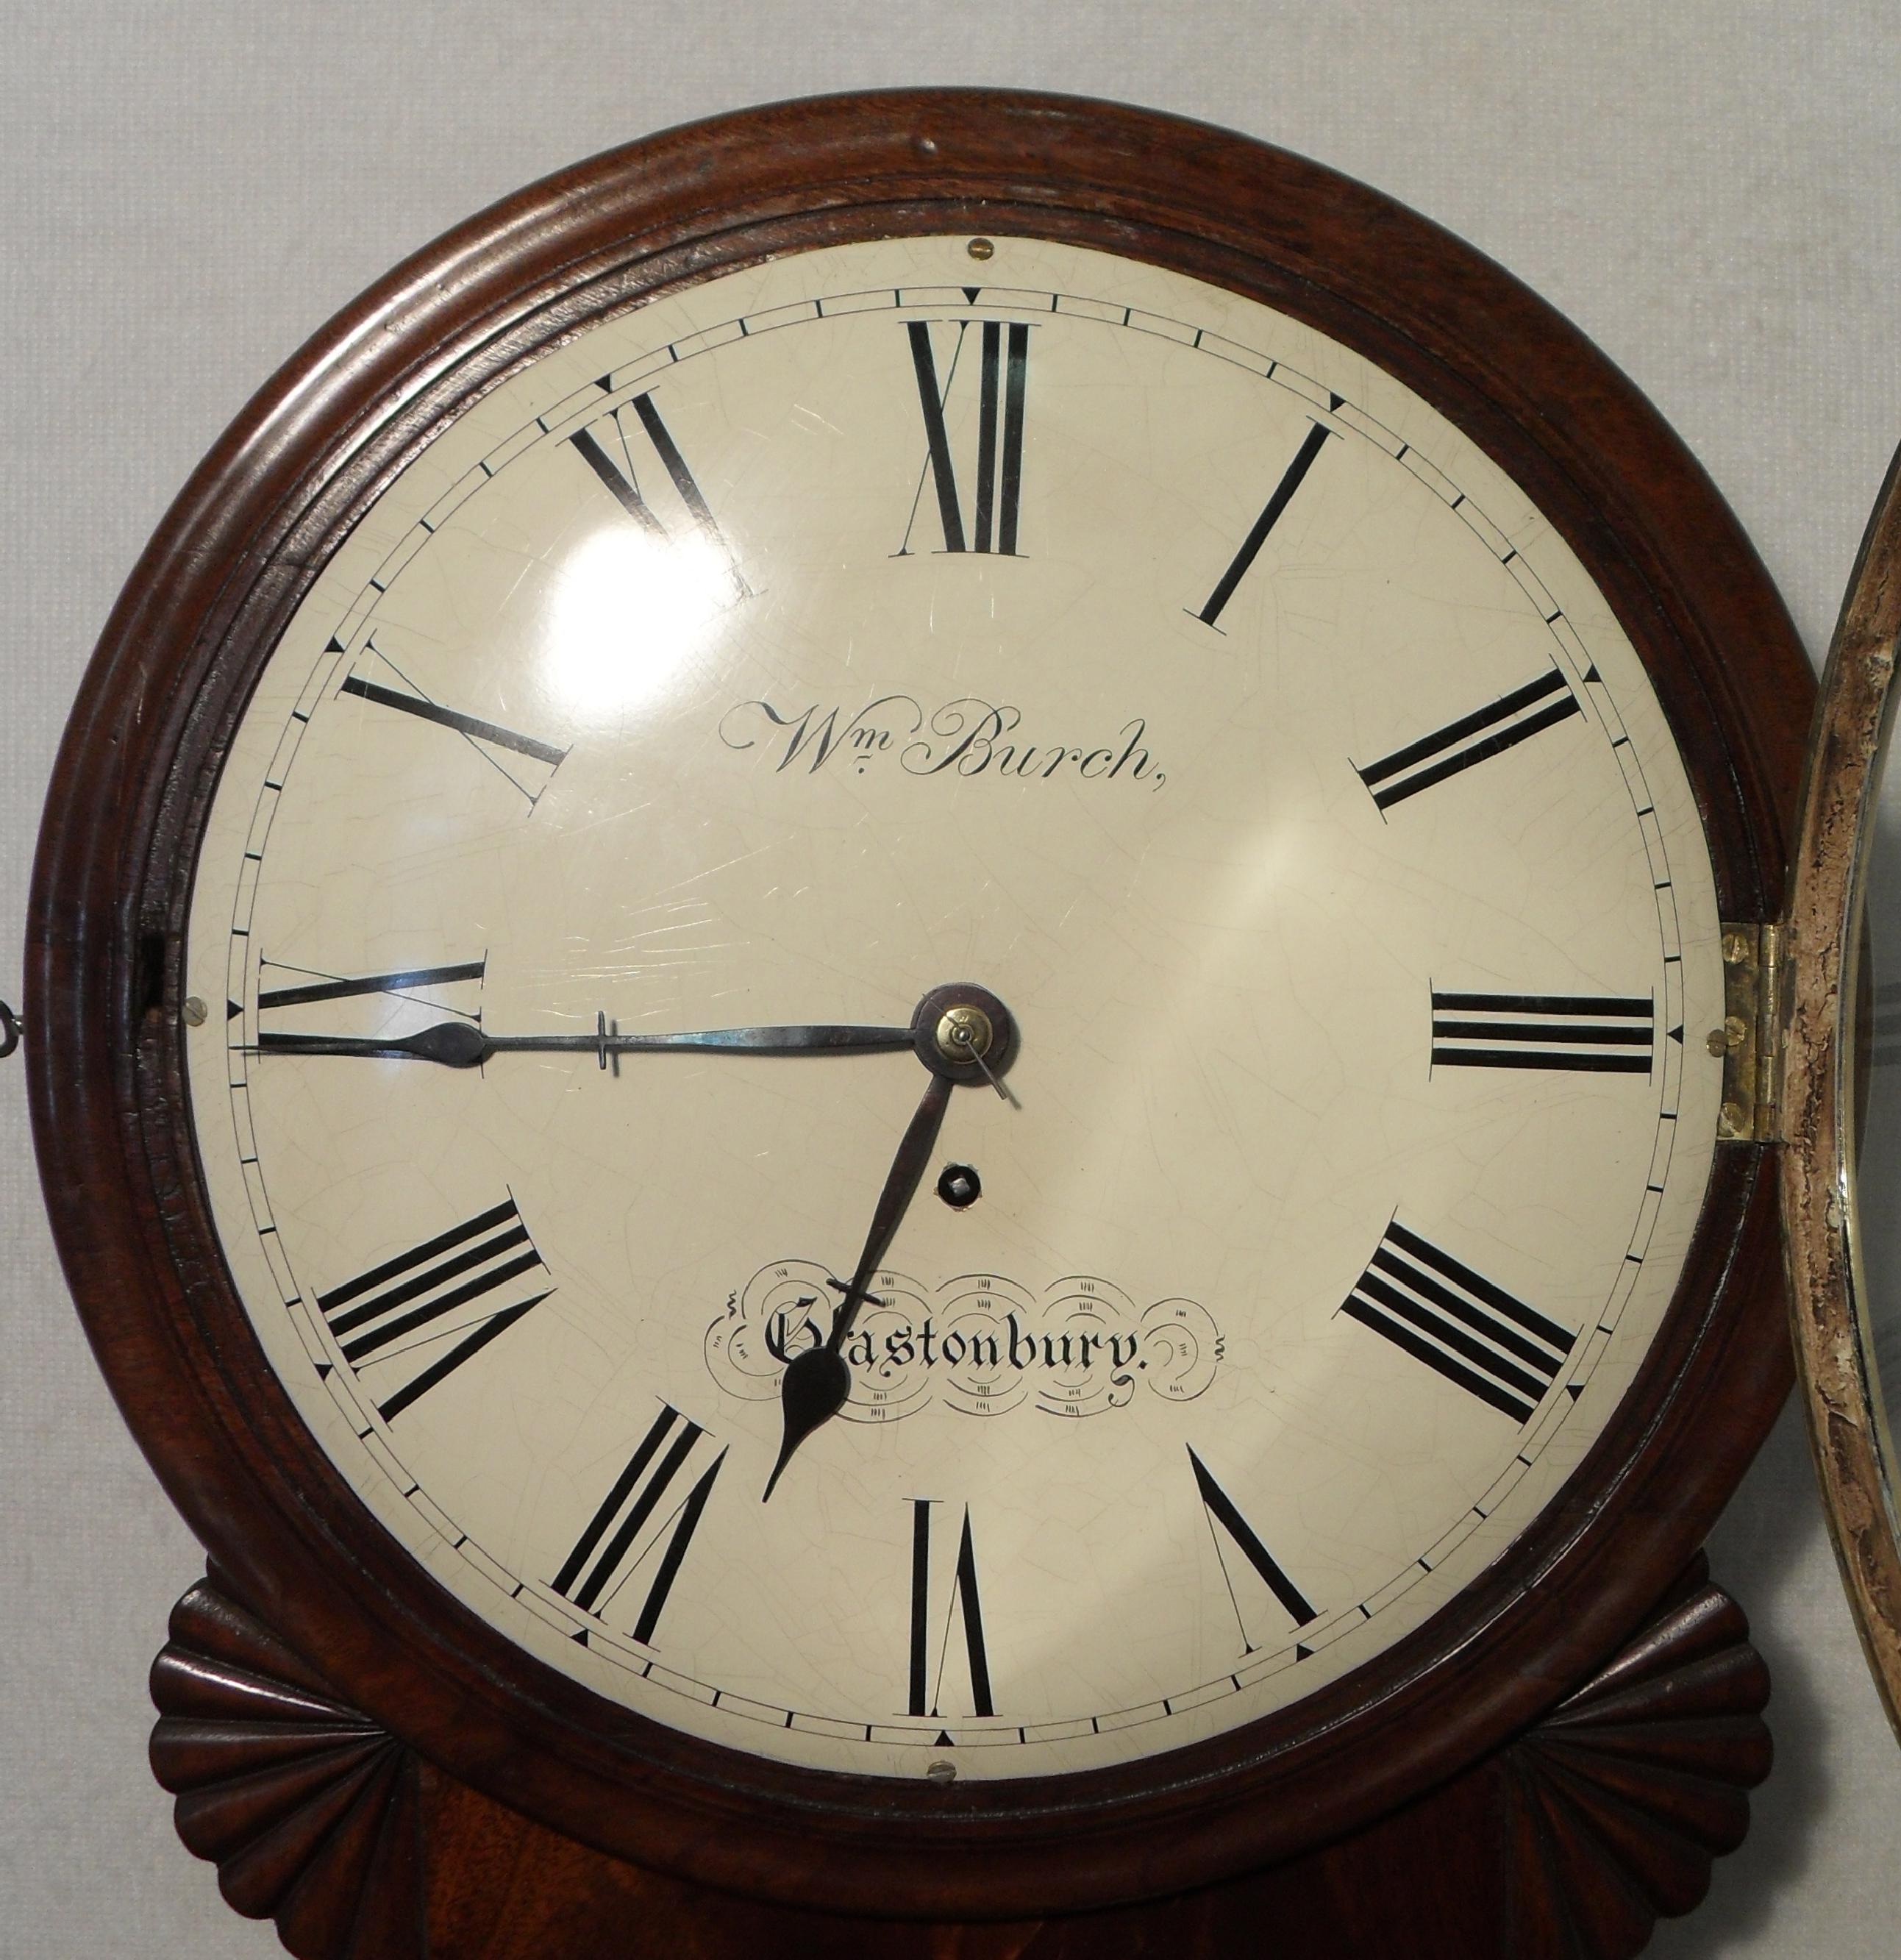 A good quality English mahogany drop dial wall clock timepiece with pendulum viewing window. The clock has a twelve inch painted dish dial and the movement is a single fusee with anchor escapement.

The dial has the makers name:-

William